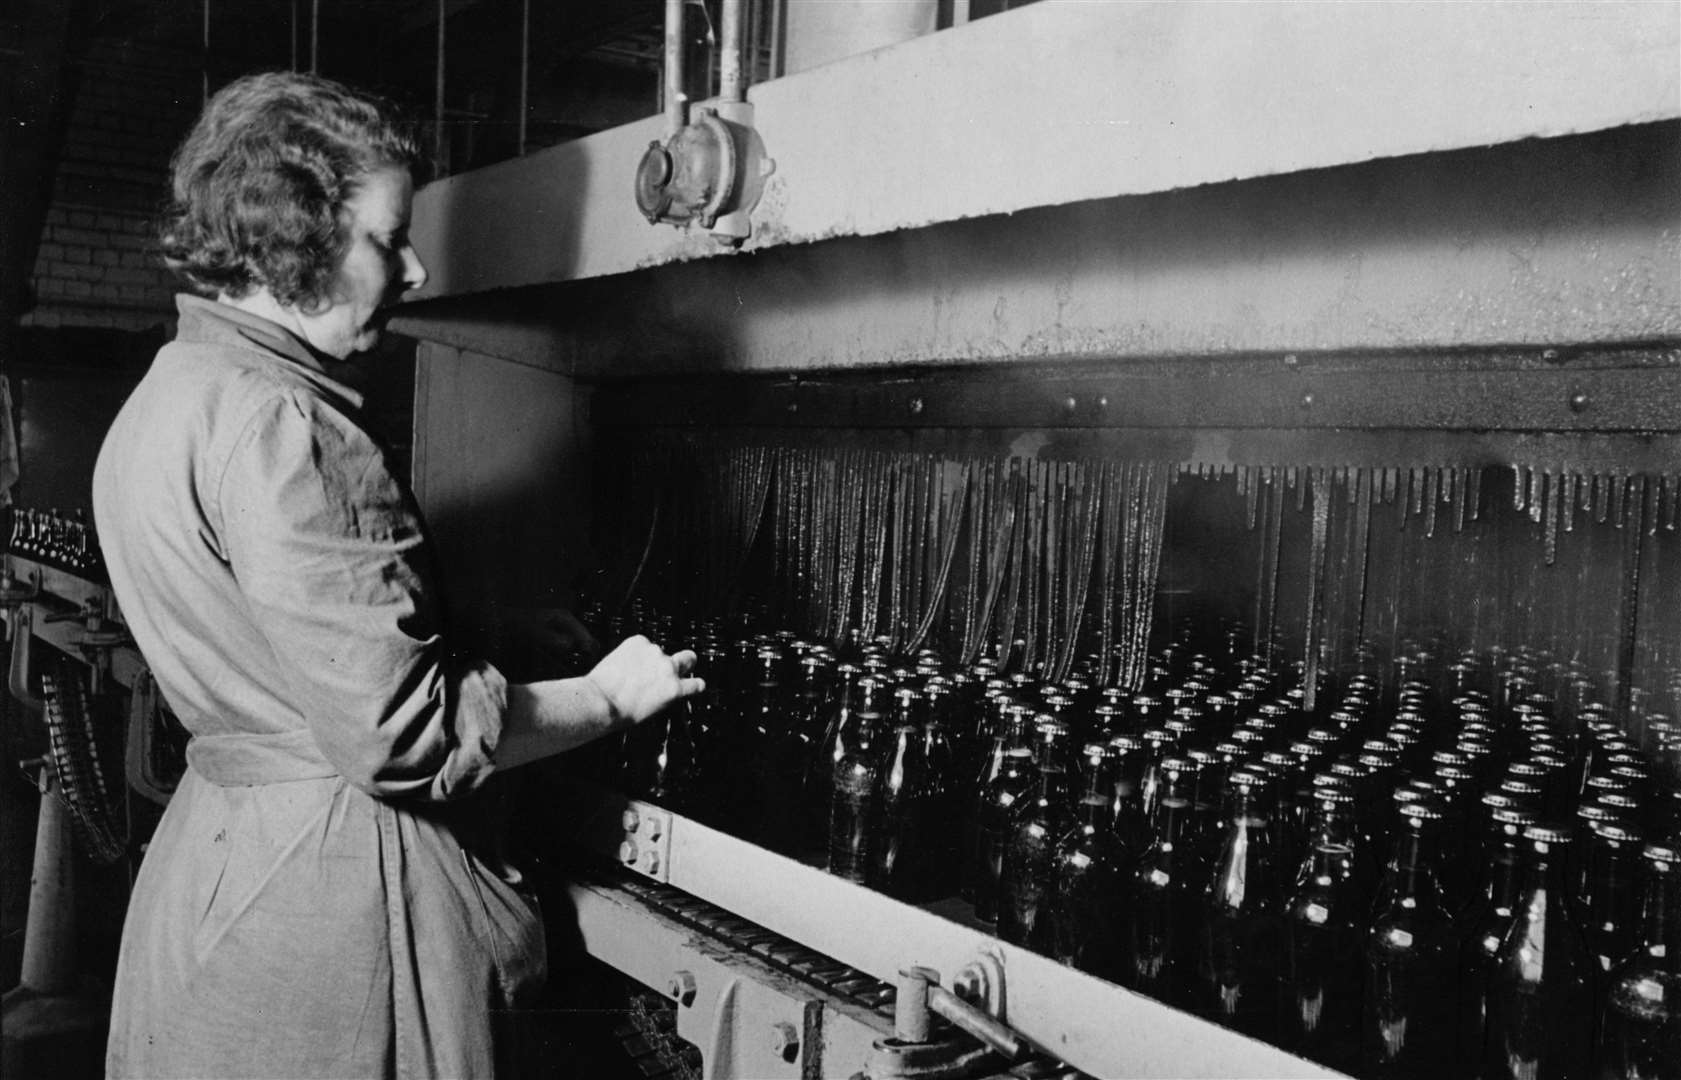 Bottling at Shepherd Neame during the Second World War